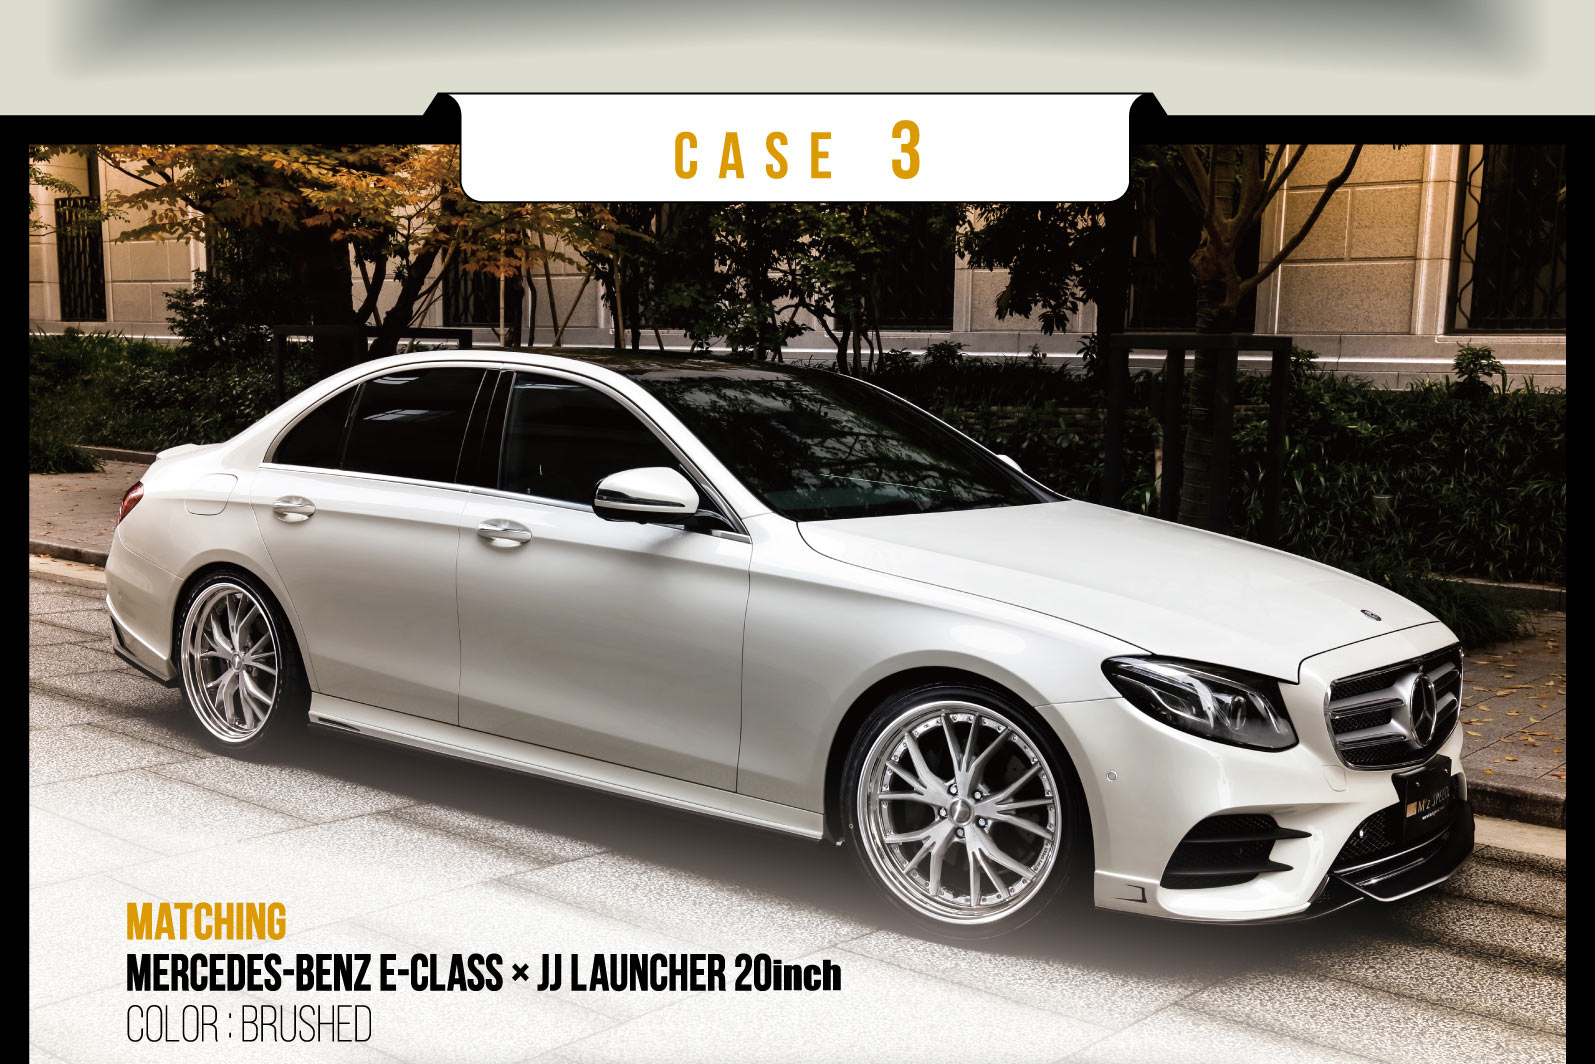 CASE 3 MATCHING Mercedes-Benz E-Class × JJ Launcher 20inch COLOR : BRUSHED